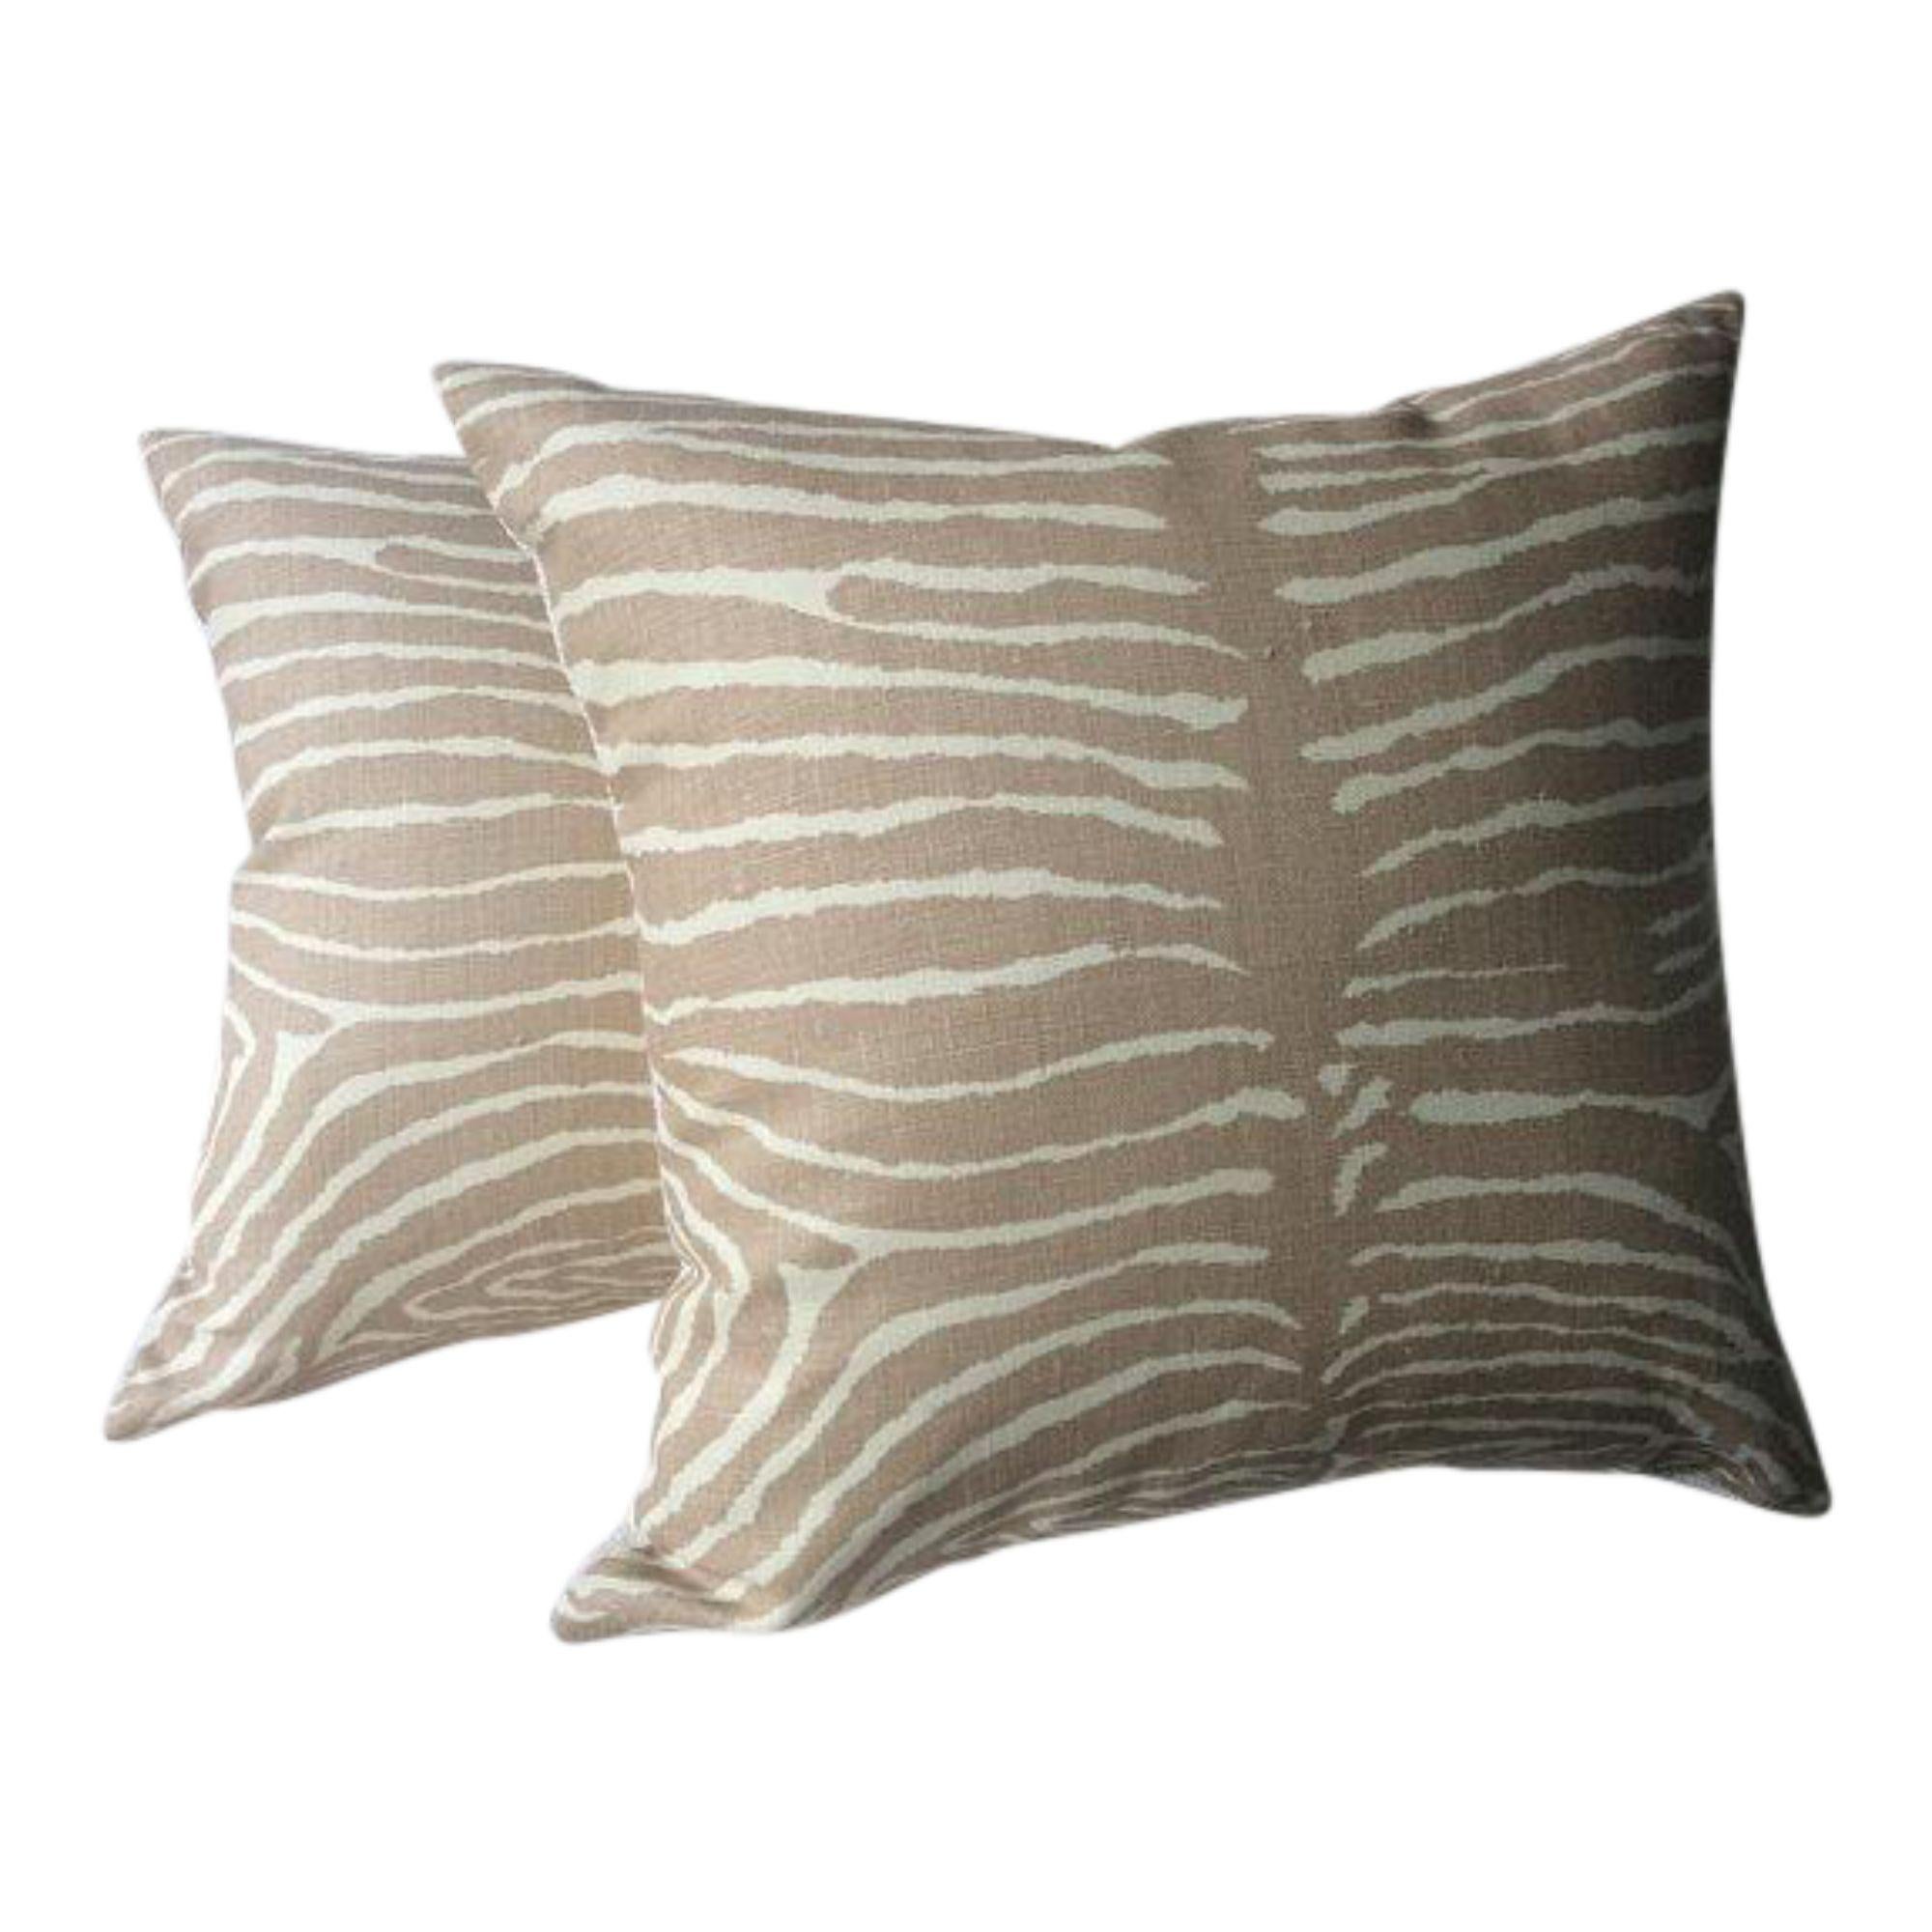 Brunschwig and Fils “Pewter” Le Zebre Tan Pillows - a Pair